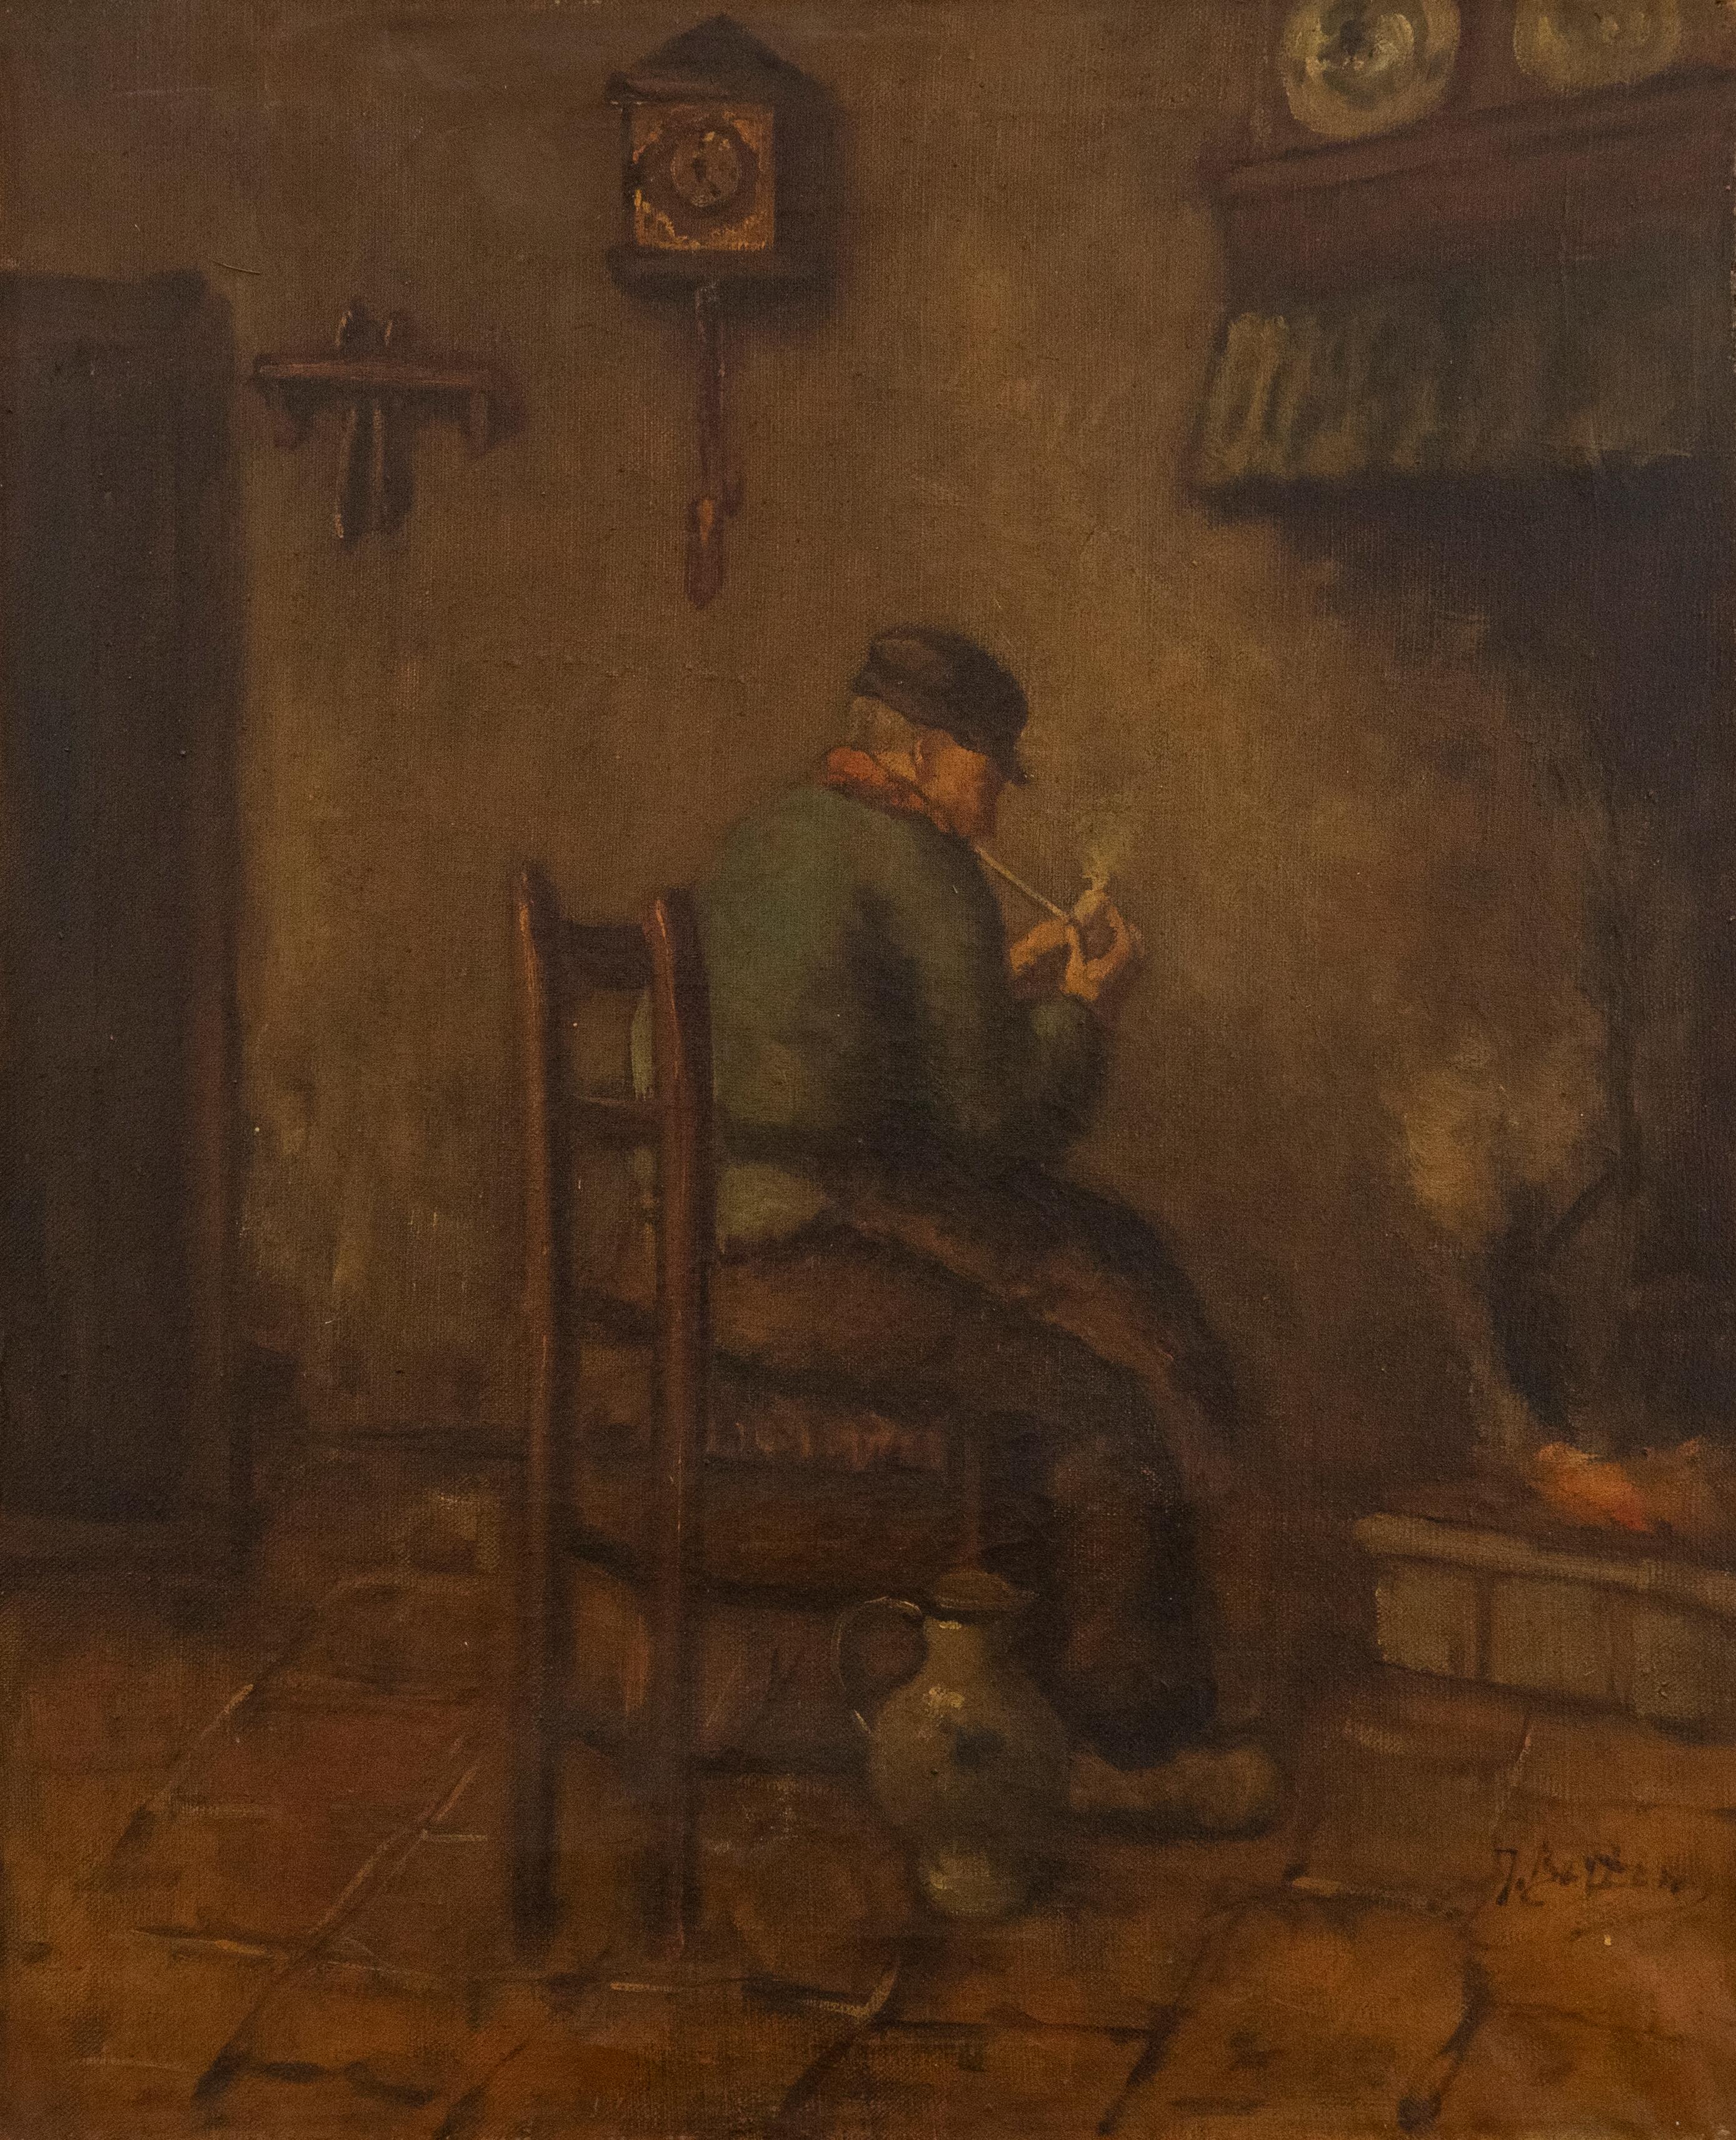 A charming scene depicting a darkened interior with a man sat by the fire on a wooden chair. He holds a lit pipe to his mouth, puffing the smoke into the room. The style is in the typical manner of Dutch School interior scenes, with dark rooms and a